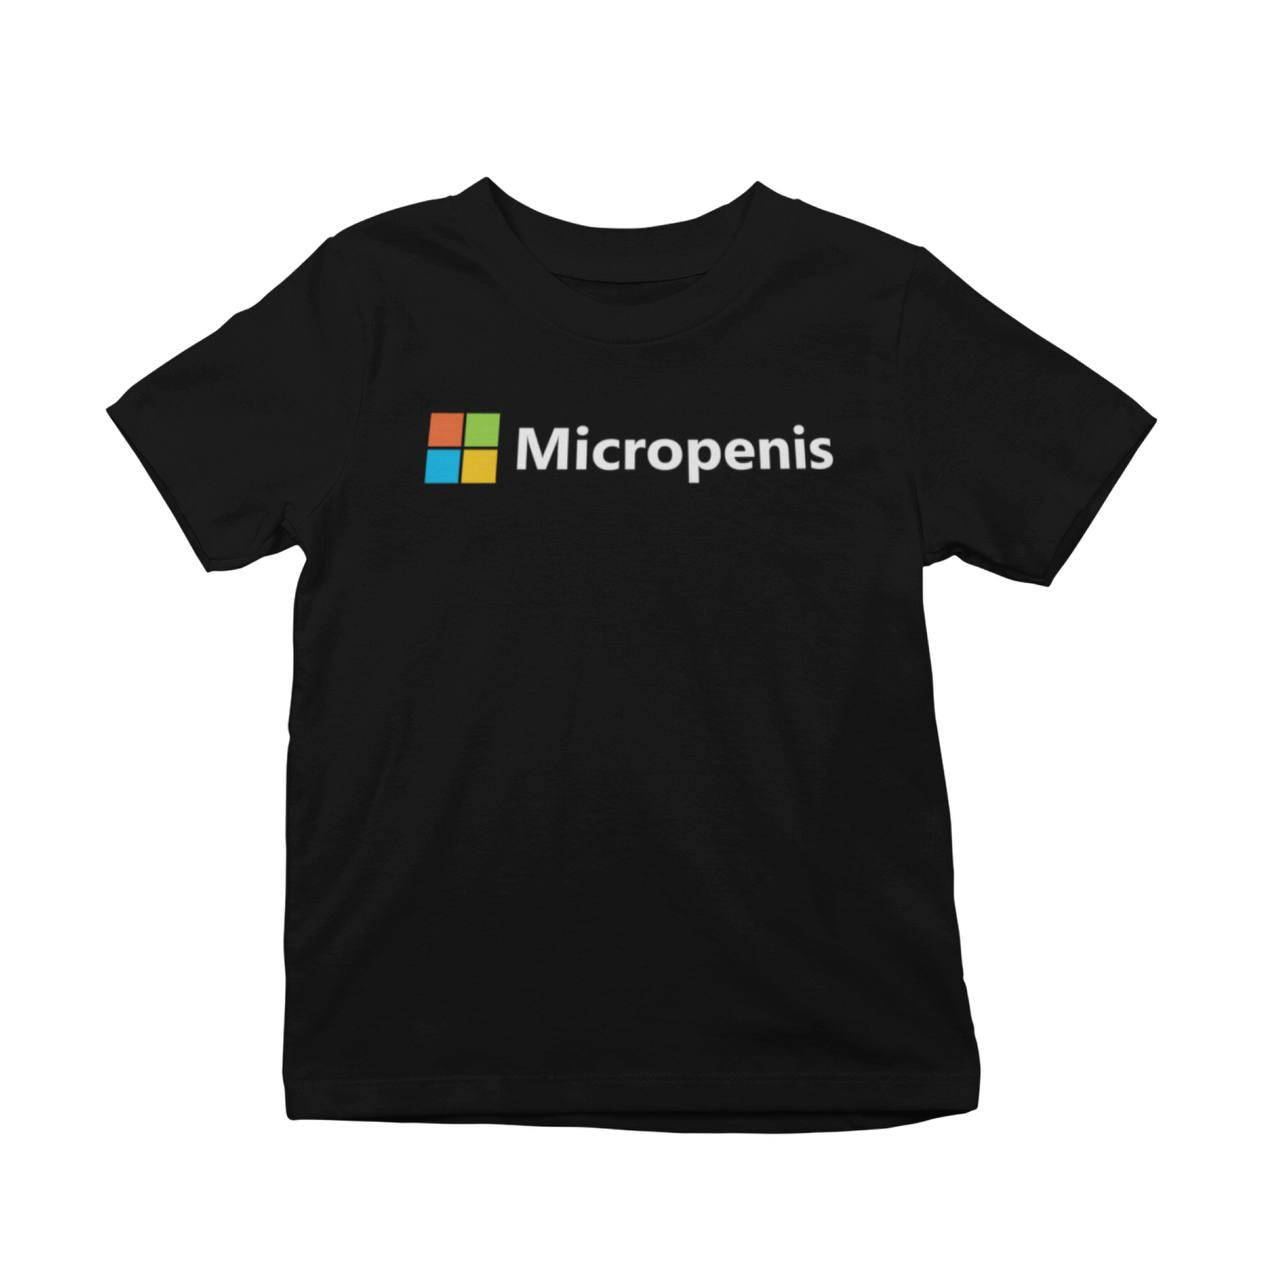 Micropenis T-Shirt